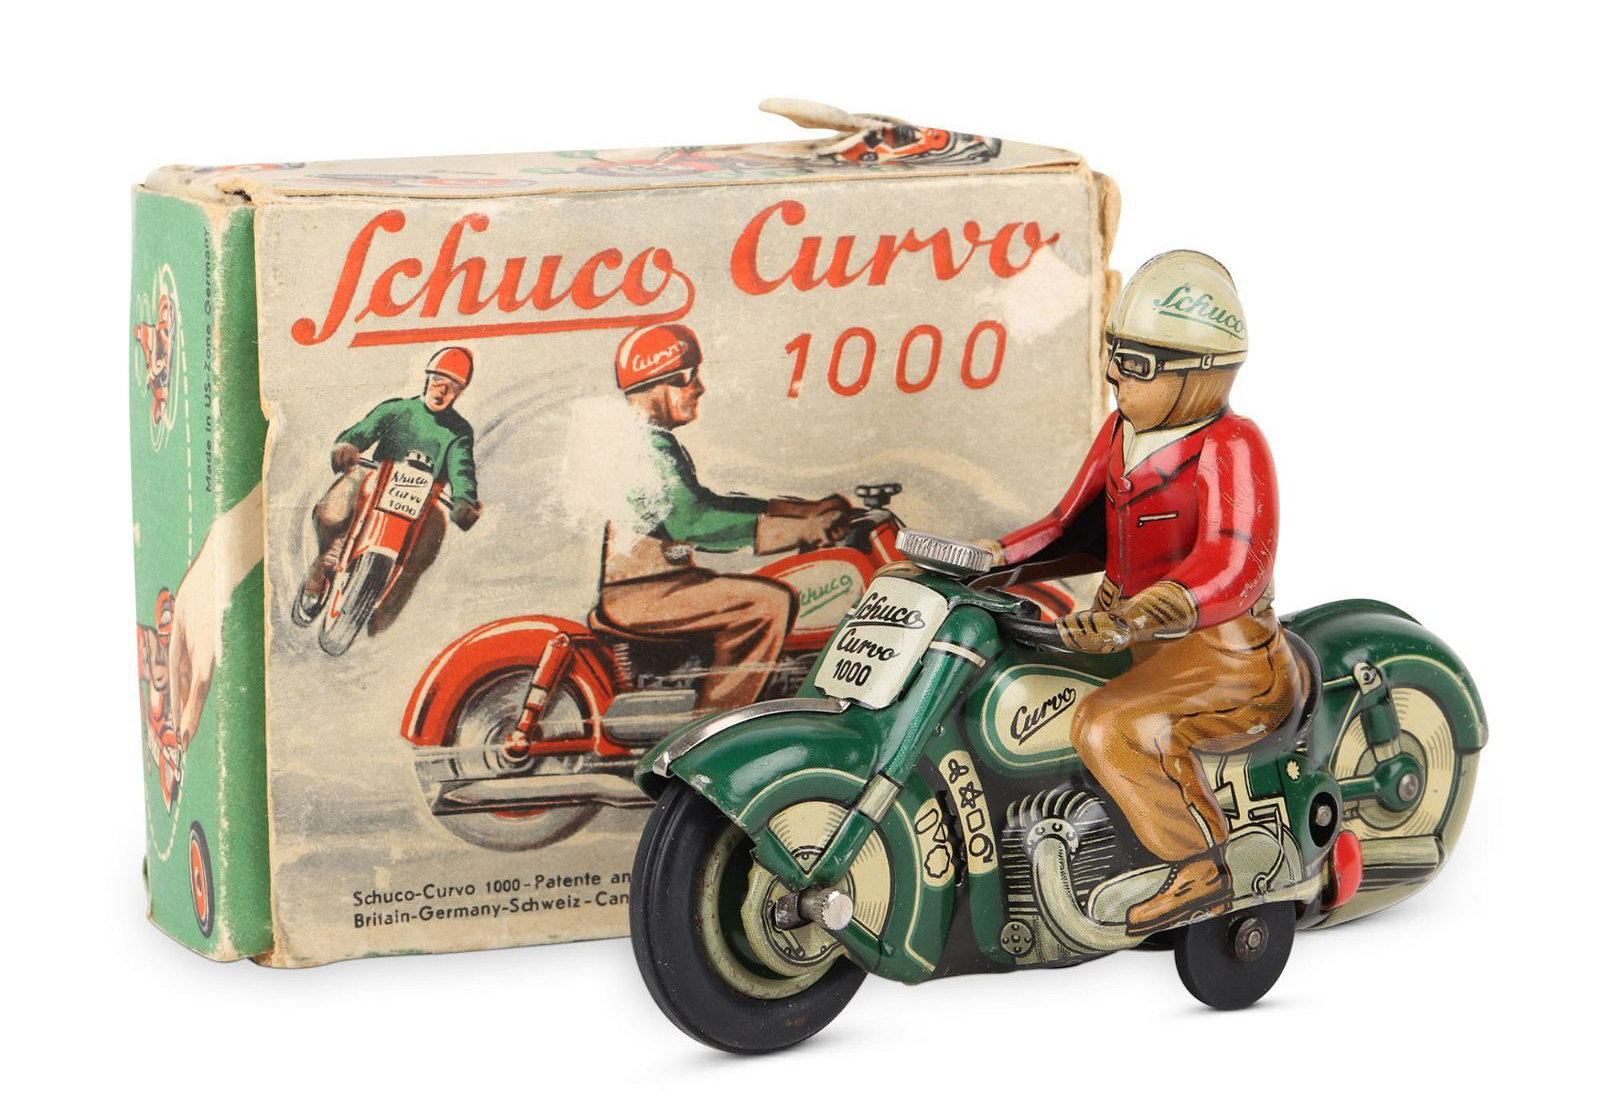 1950s Schuco Curvo 1000 lithographed tin motorcycle, one of two on offer in the March 1 sale, estimated at CA$400-CA$600 ($295-$445) at Miller & Miller.
